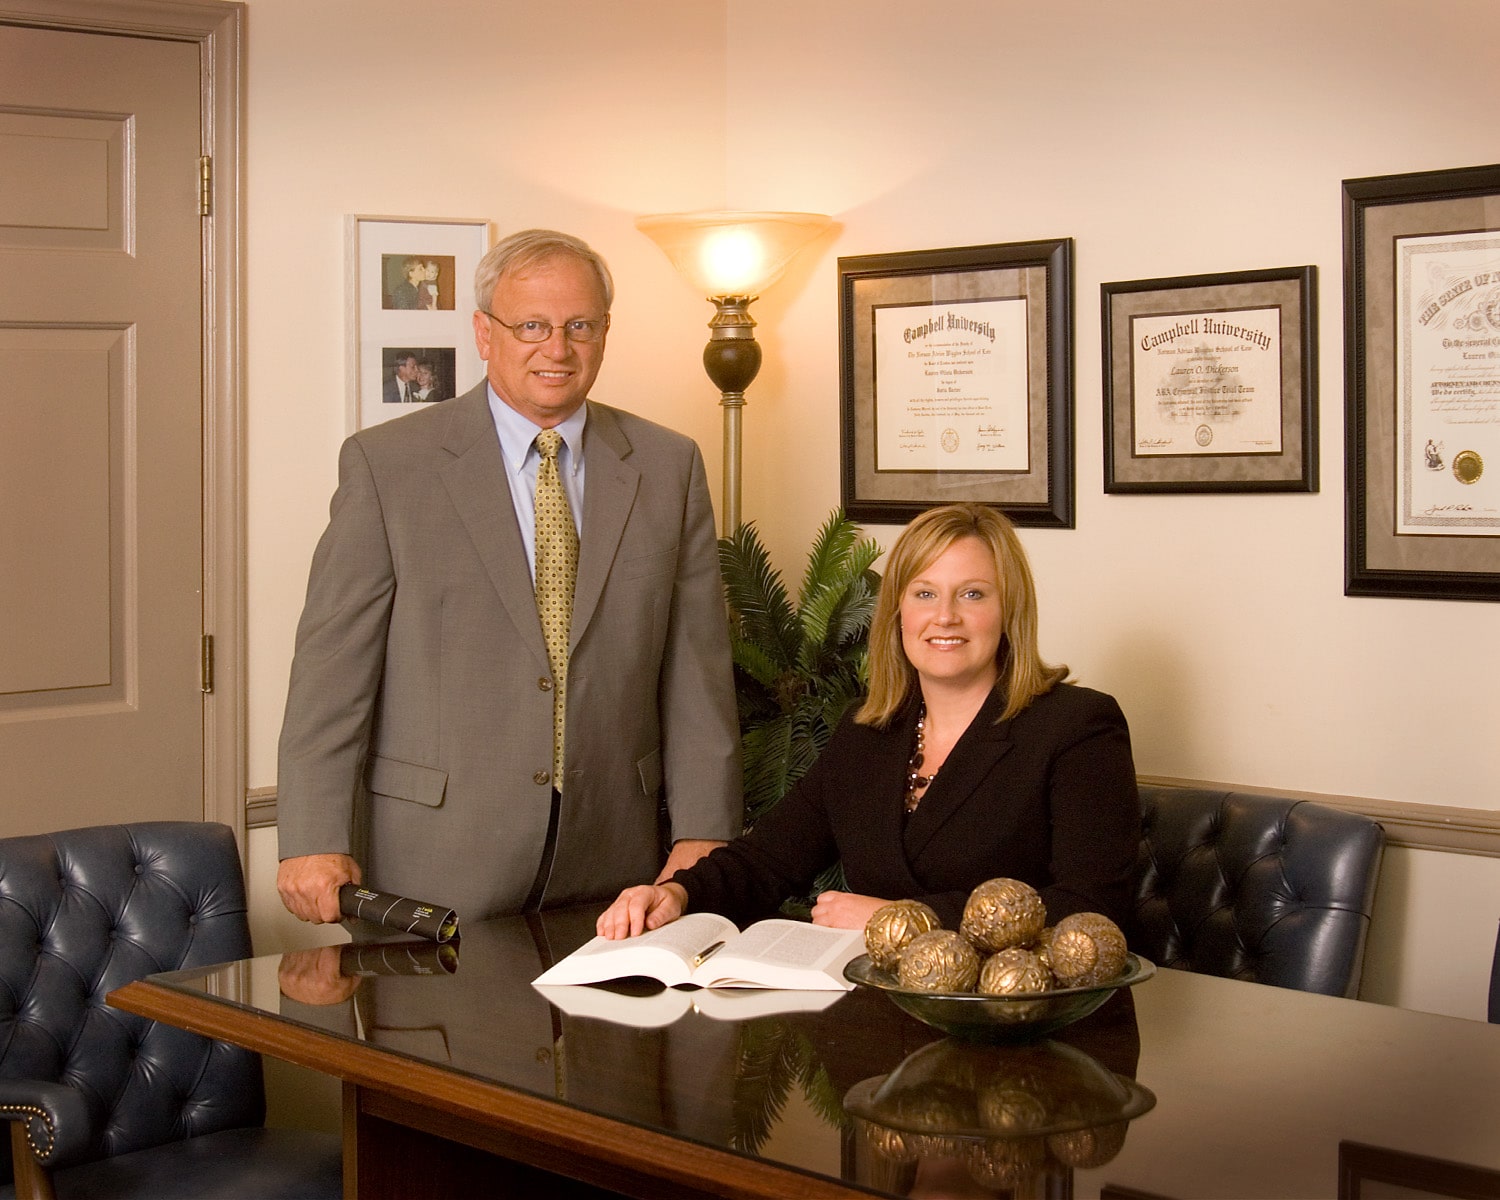 Photo of attorneys Donald Dickerson and Lauren Dickerson